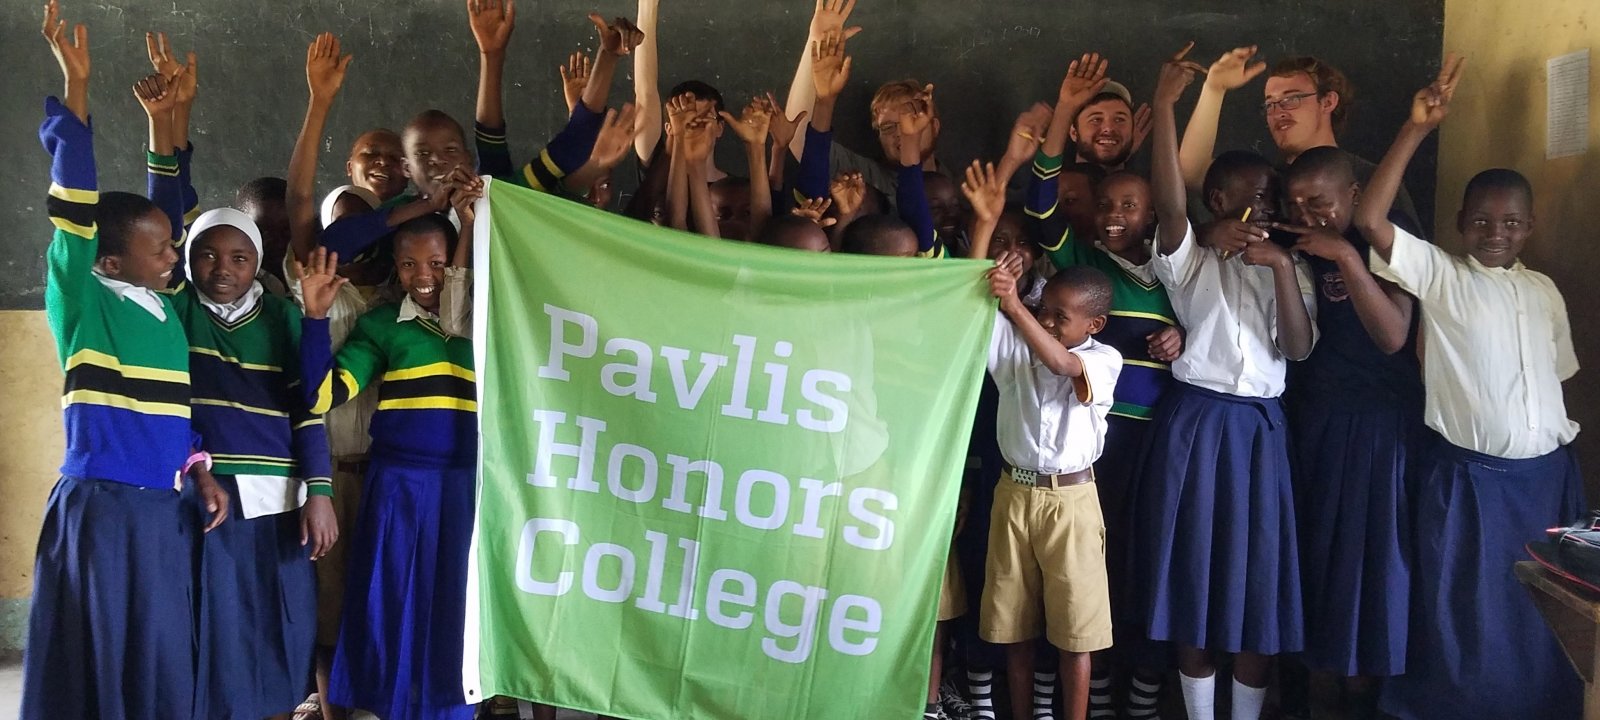 Students holding a Pavlis Honors College flag